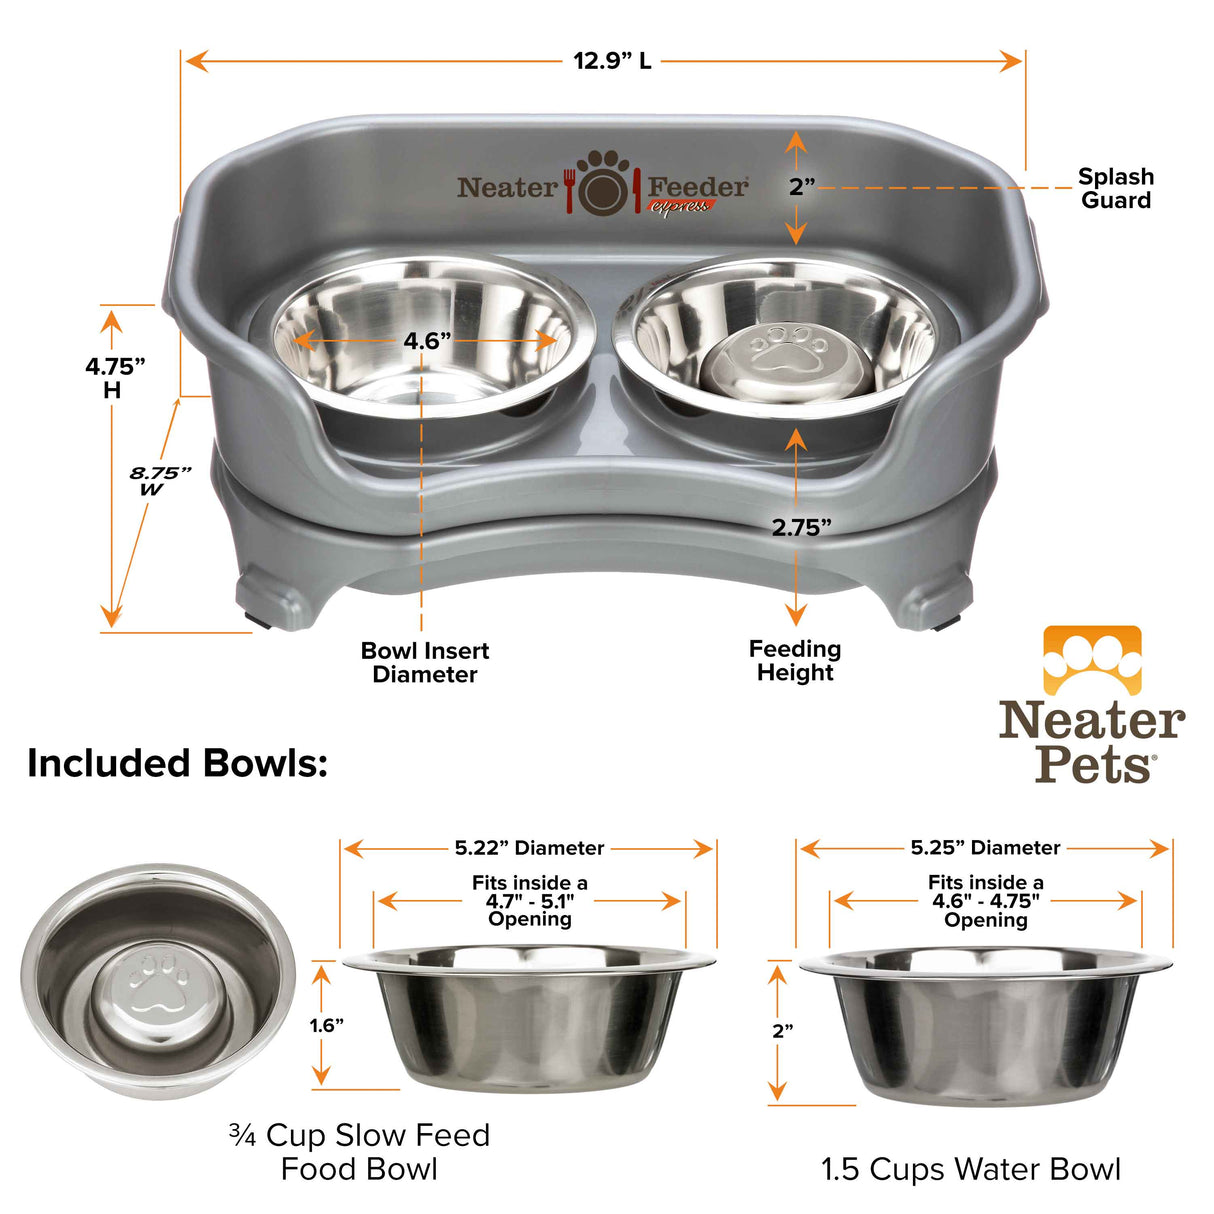 Dimensions of cat to small dog gunmetal EXPRESS Neater Feeder, 3/4 cup Stainless Steel Slow Feed Bowl, and 1.5 cup water bowl